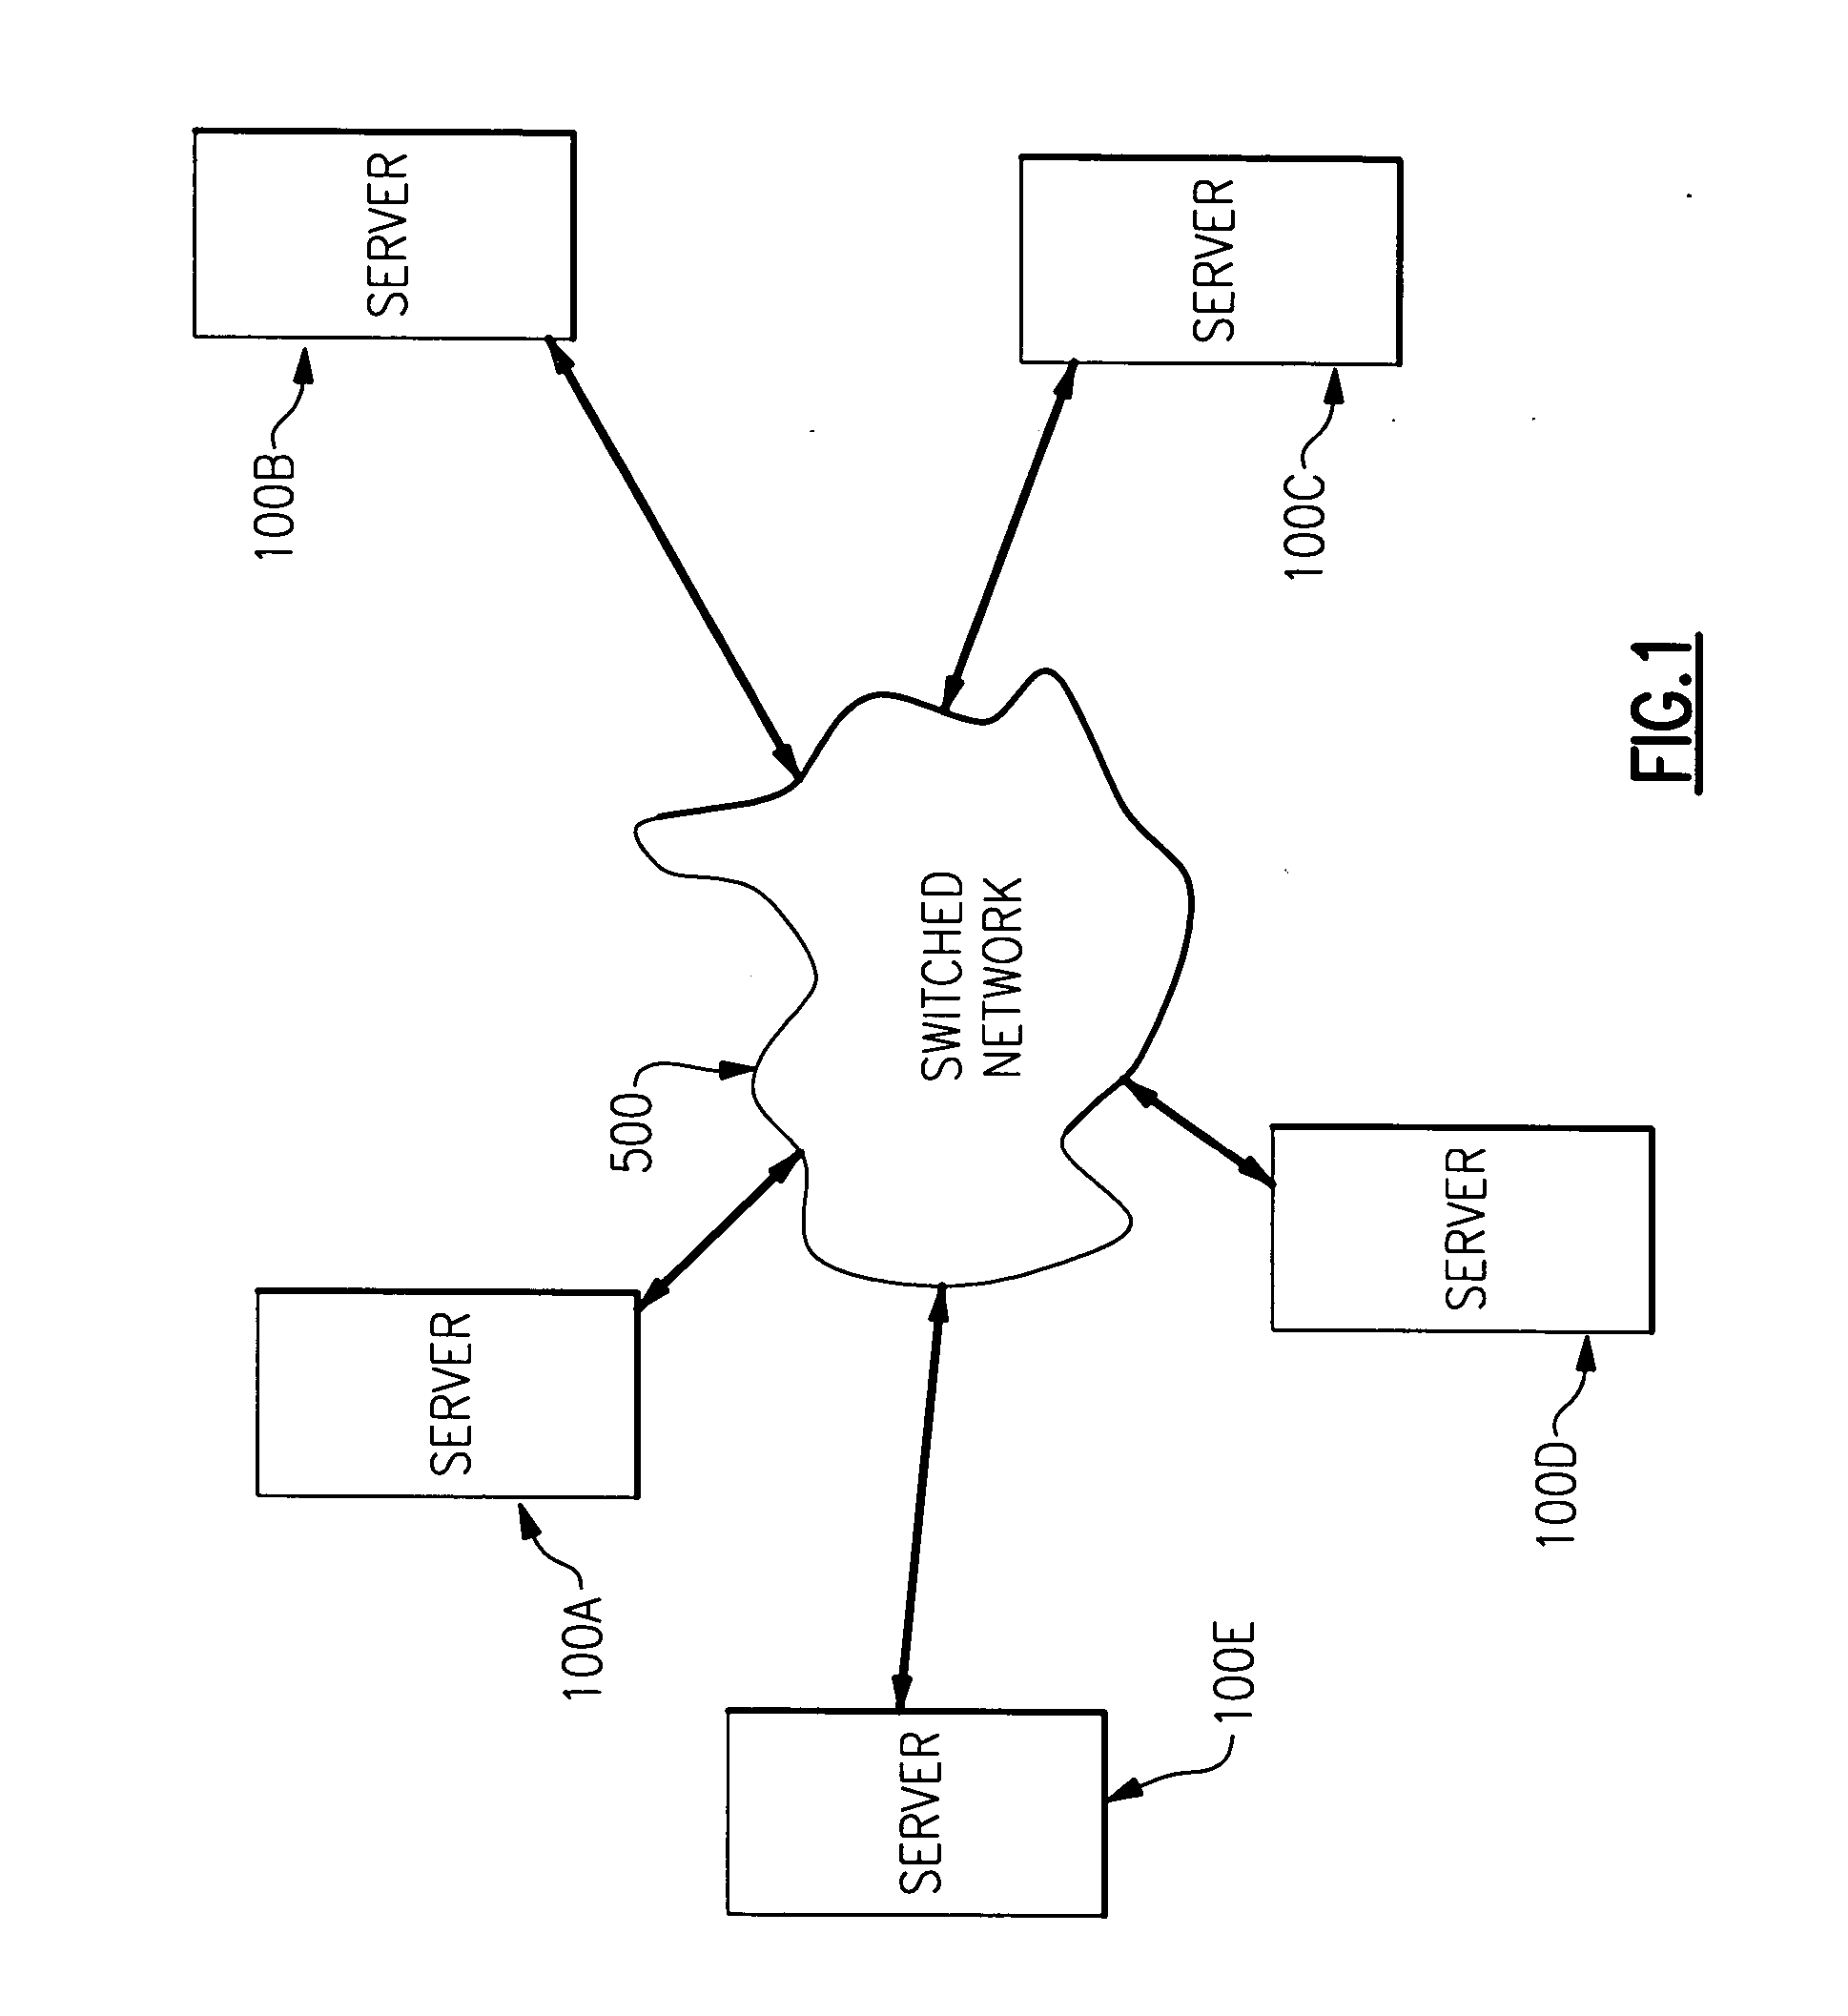 Efficient zero copy transfer of messages between nodes in a data processing system